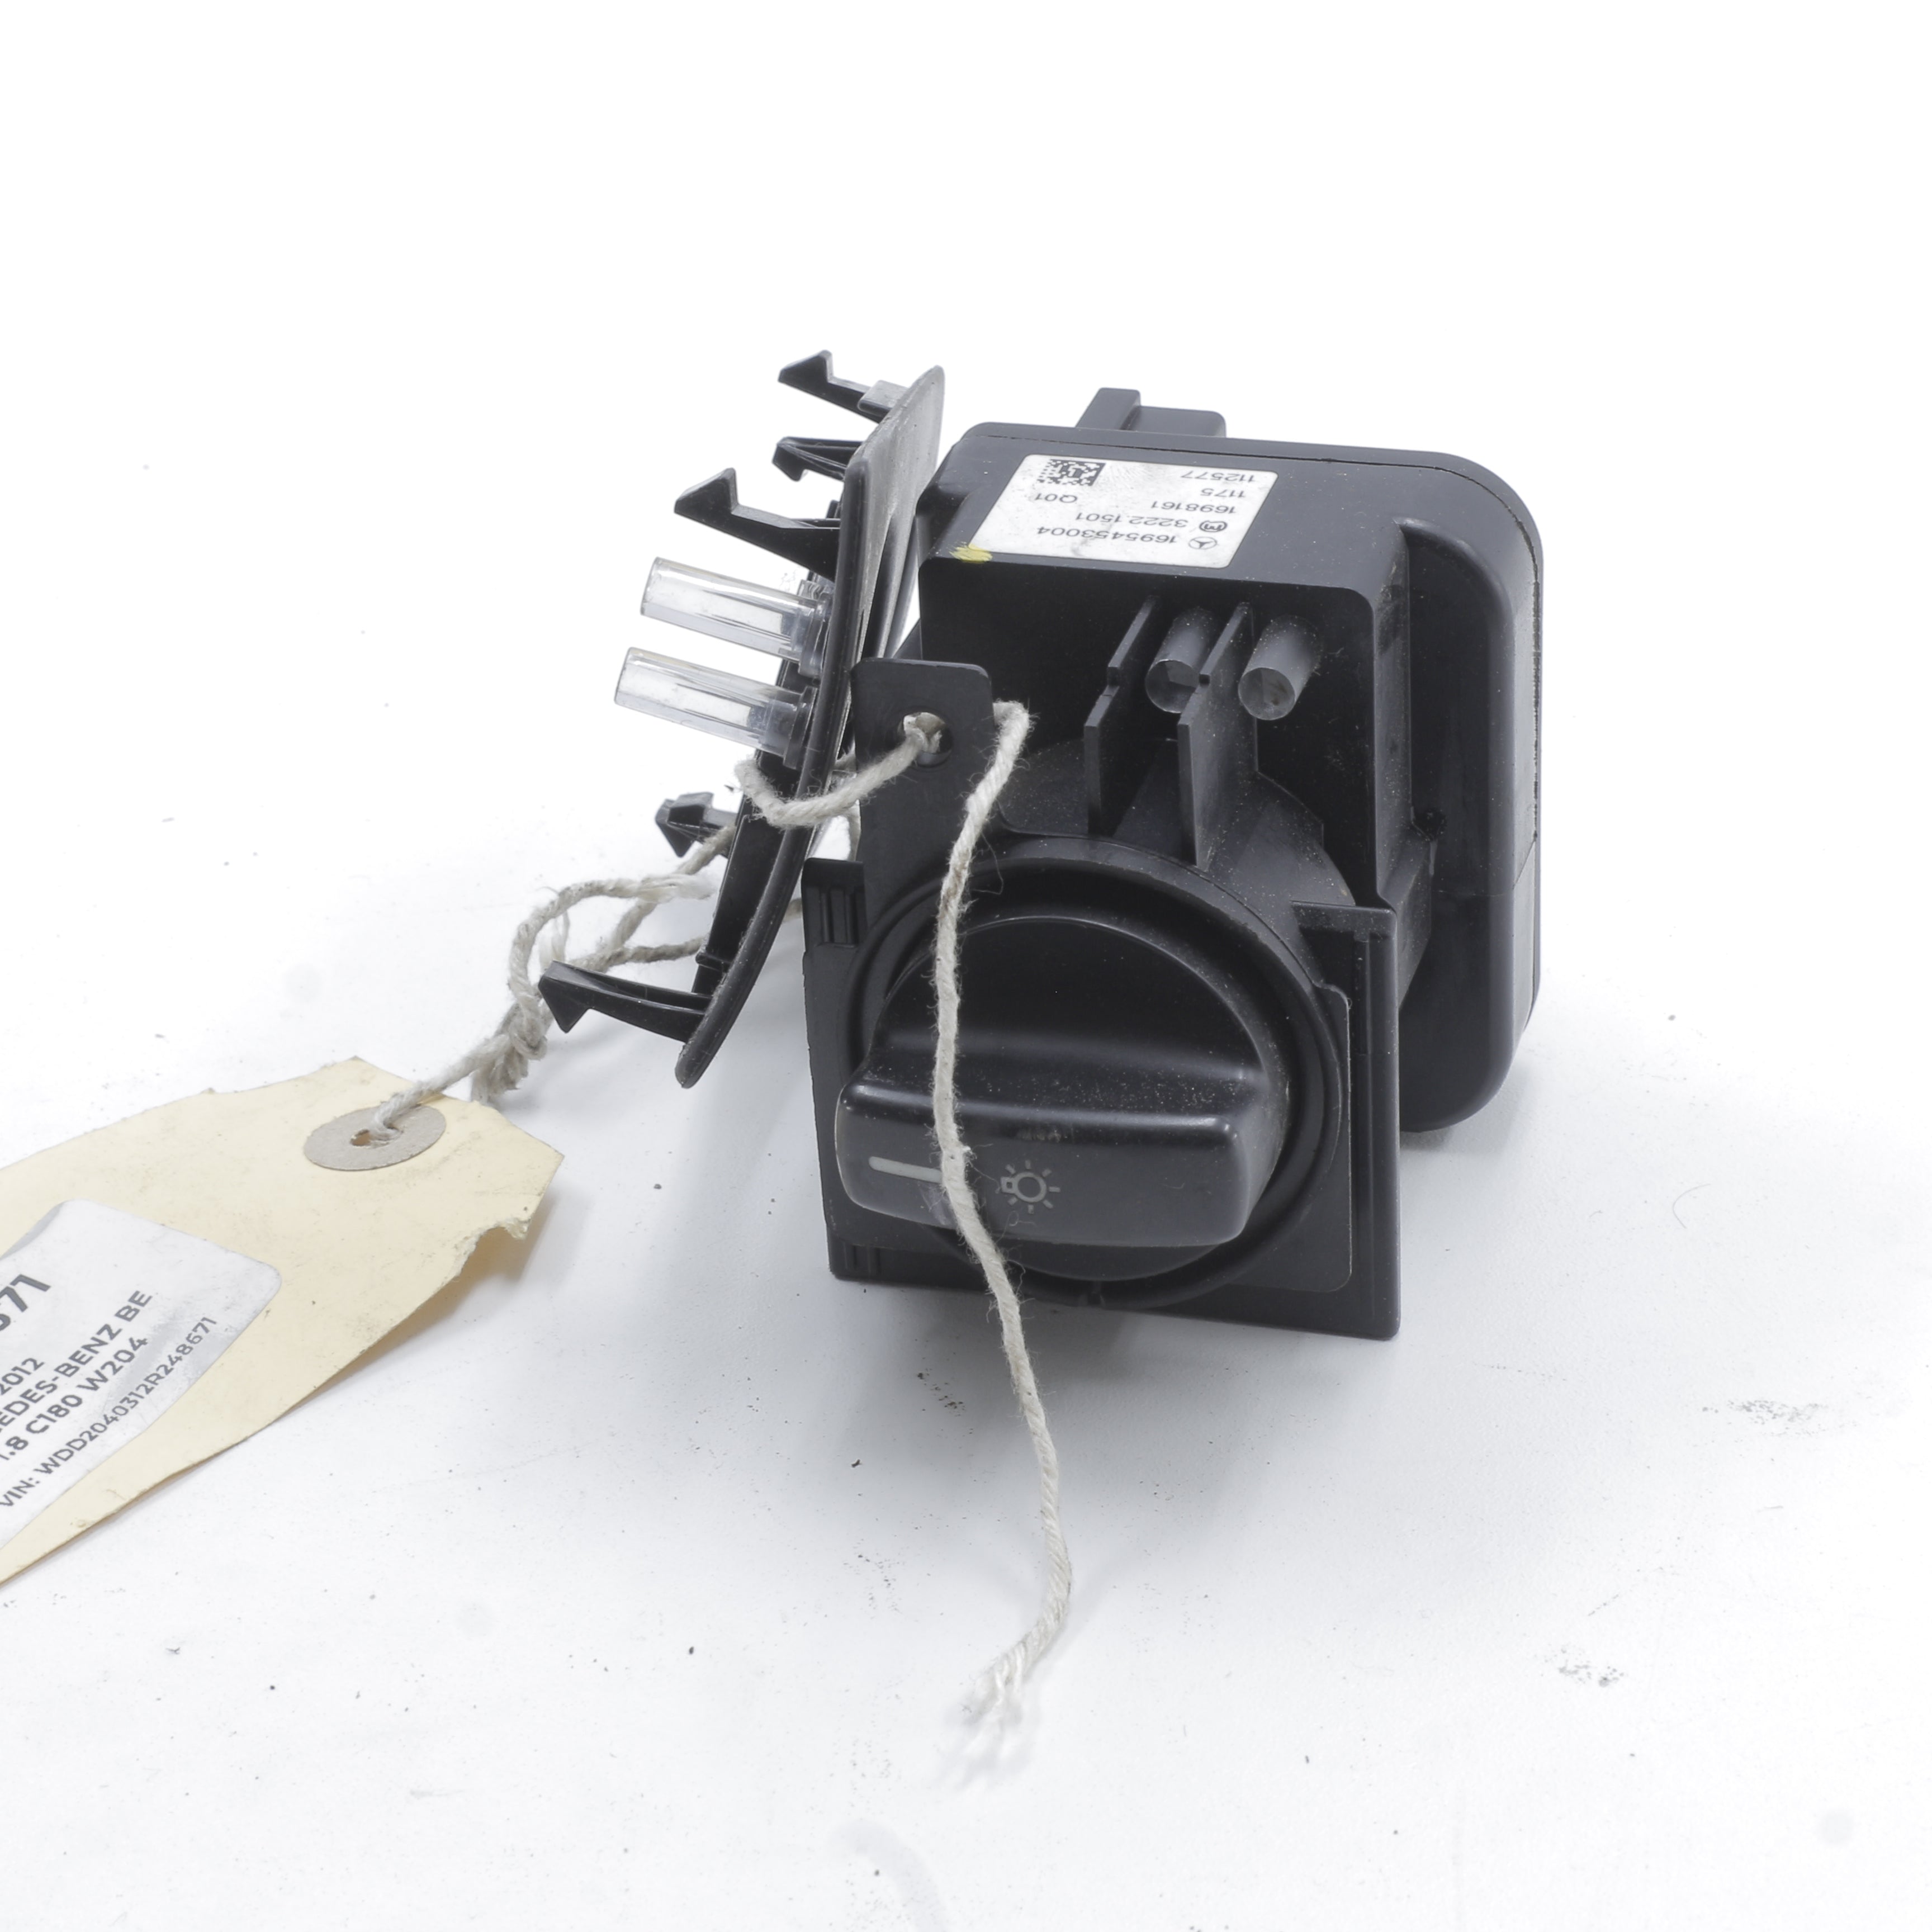 Mercedes-Benz C180 (Facelift) W204 1.8T Light Switch + Cover